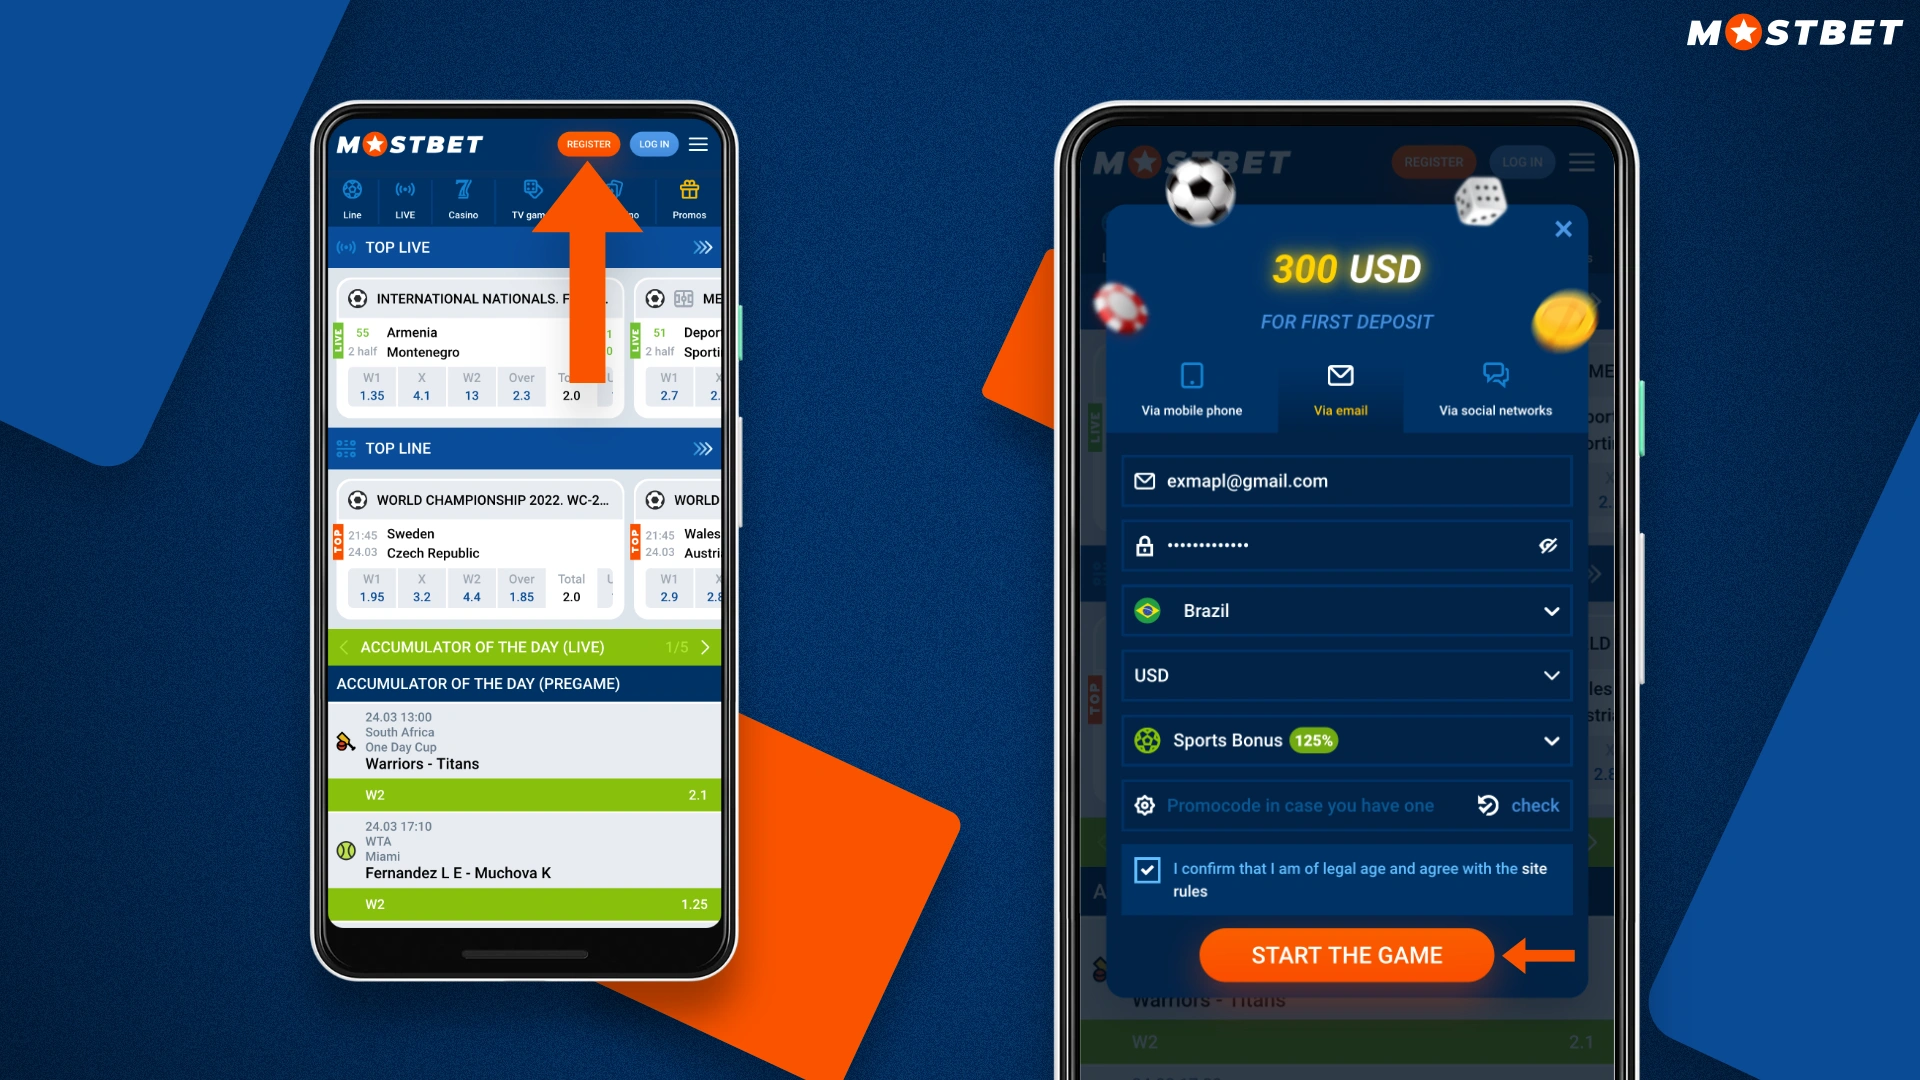 A step-by-step guide on how to register at Mostbet from a mobile device